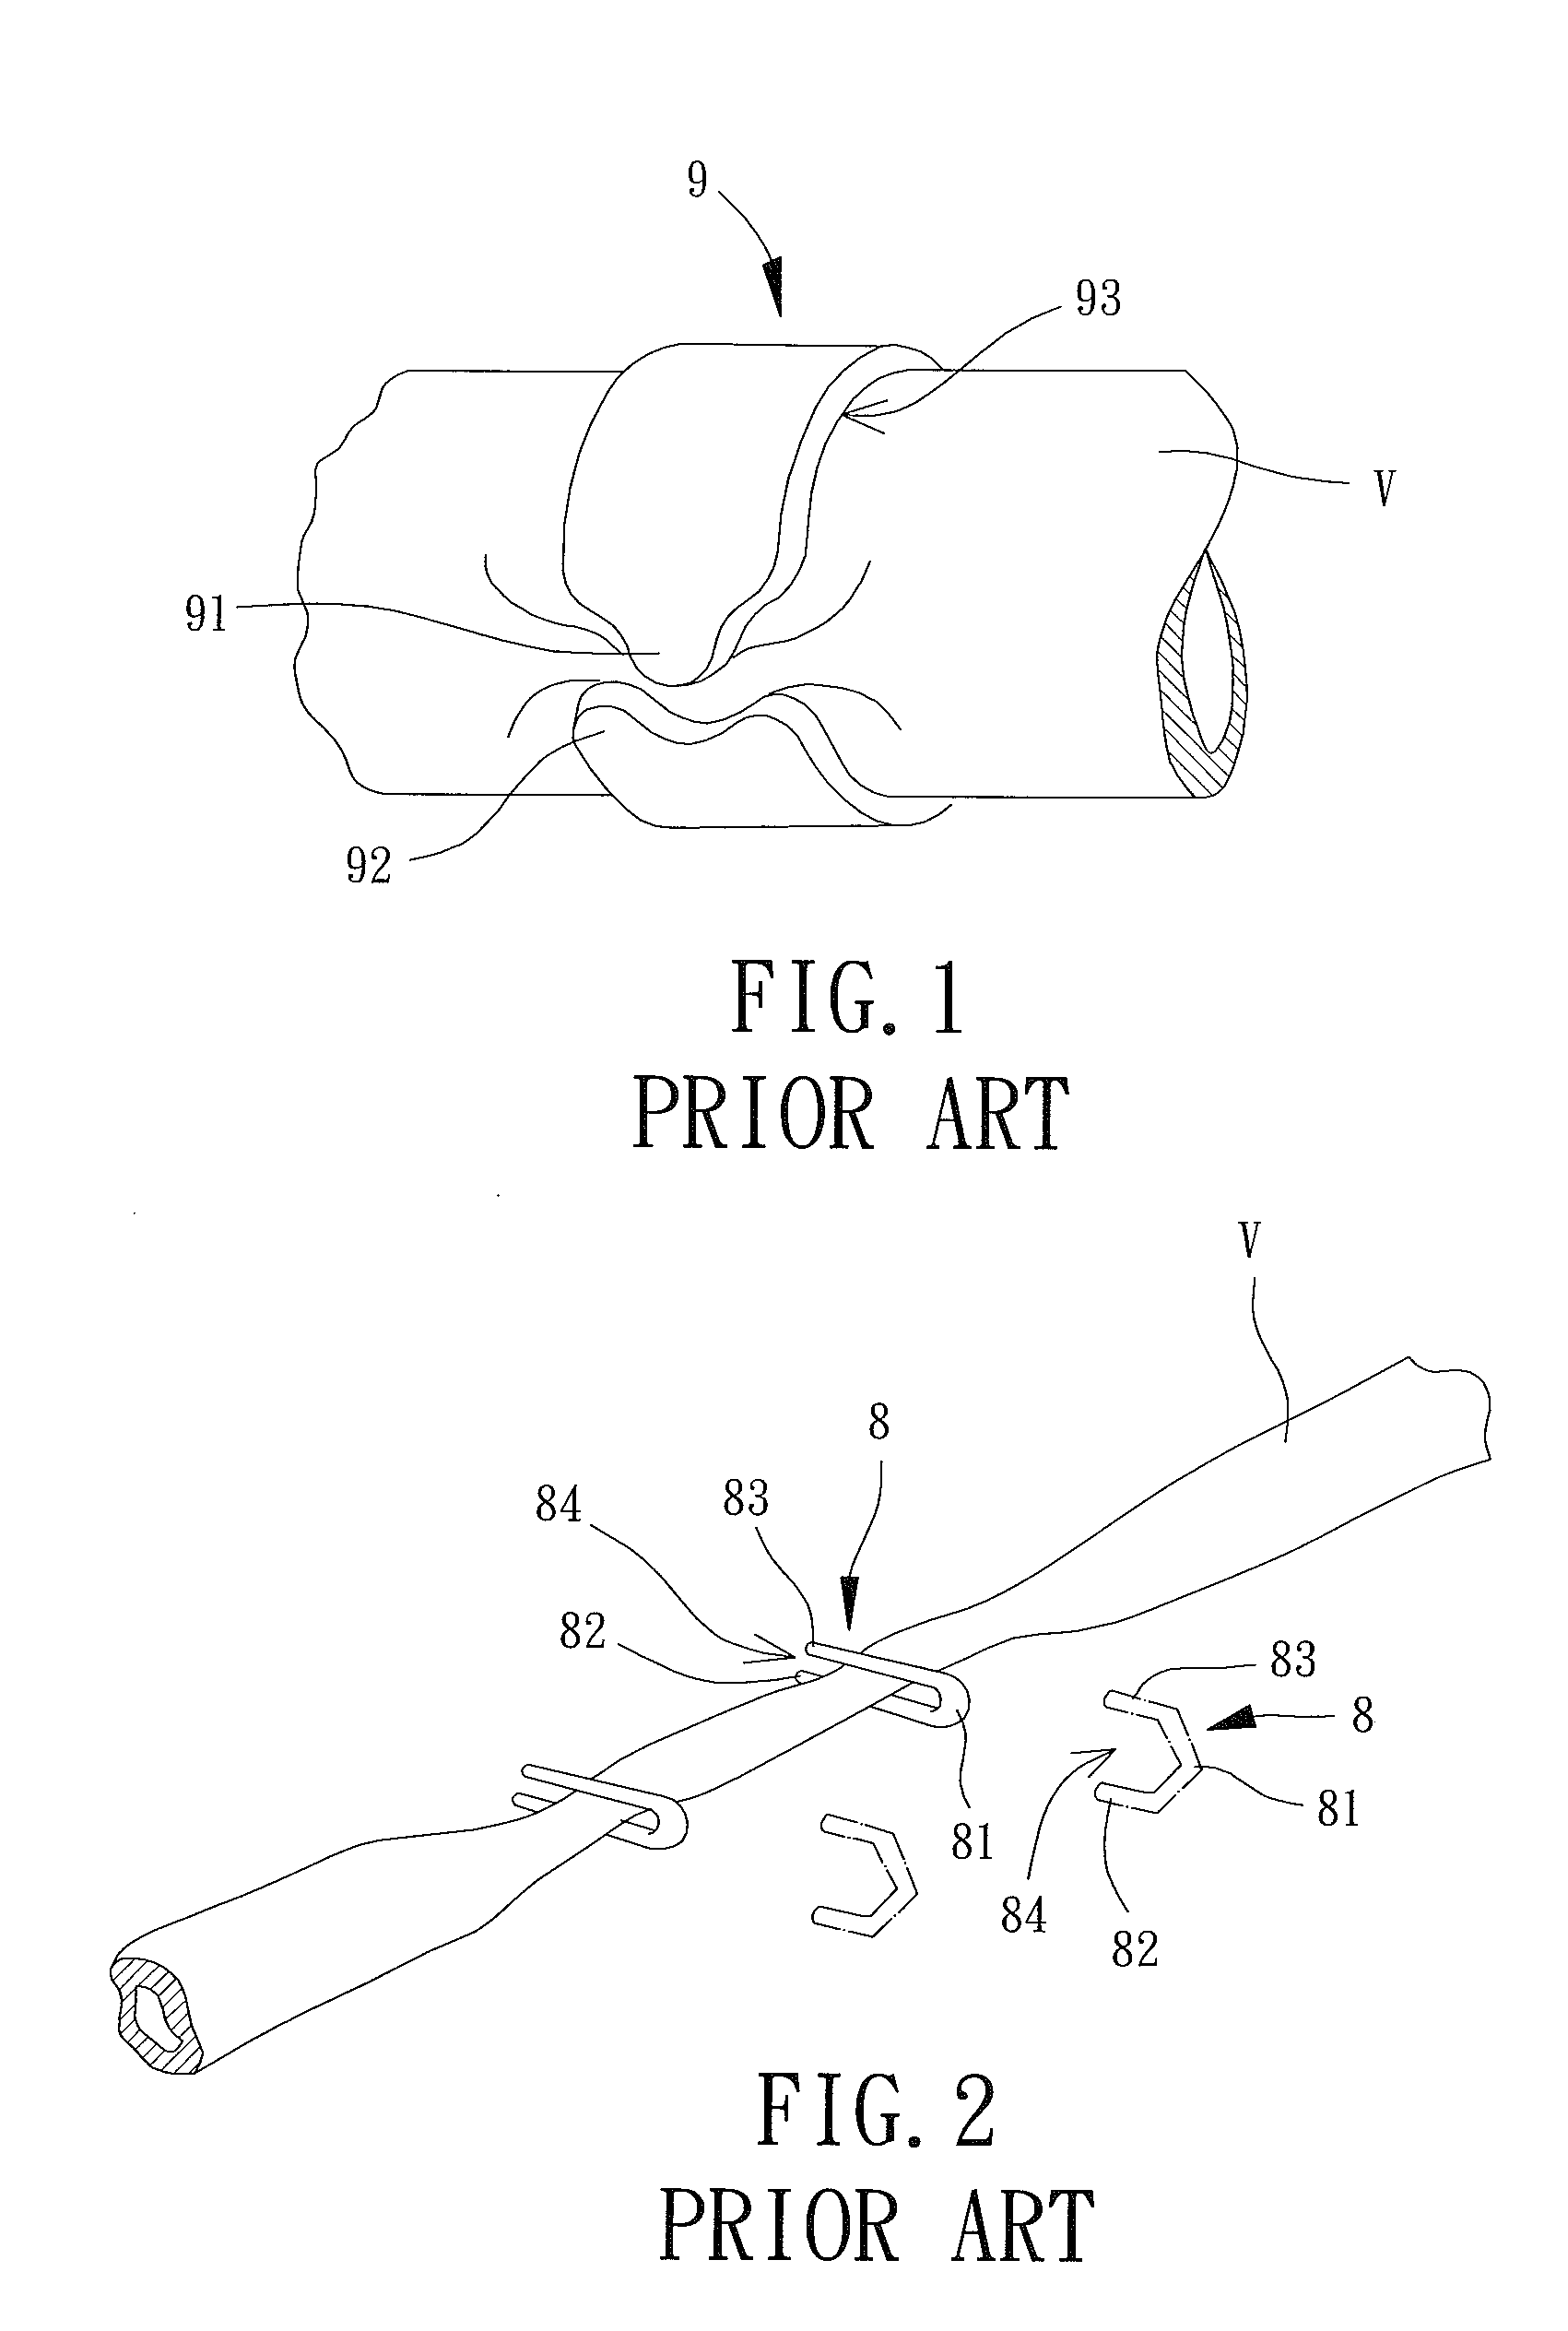 Vascular Clamp for Use in Minimally Invasive Surgery